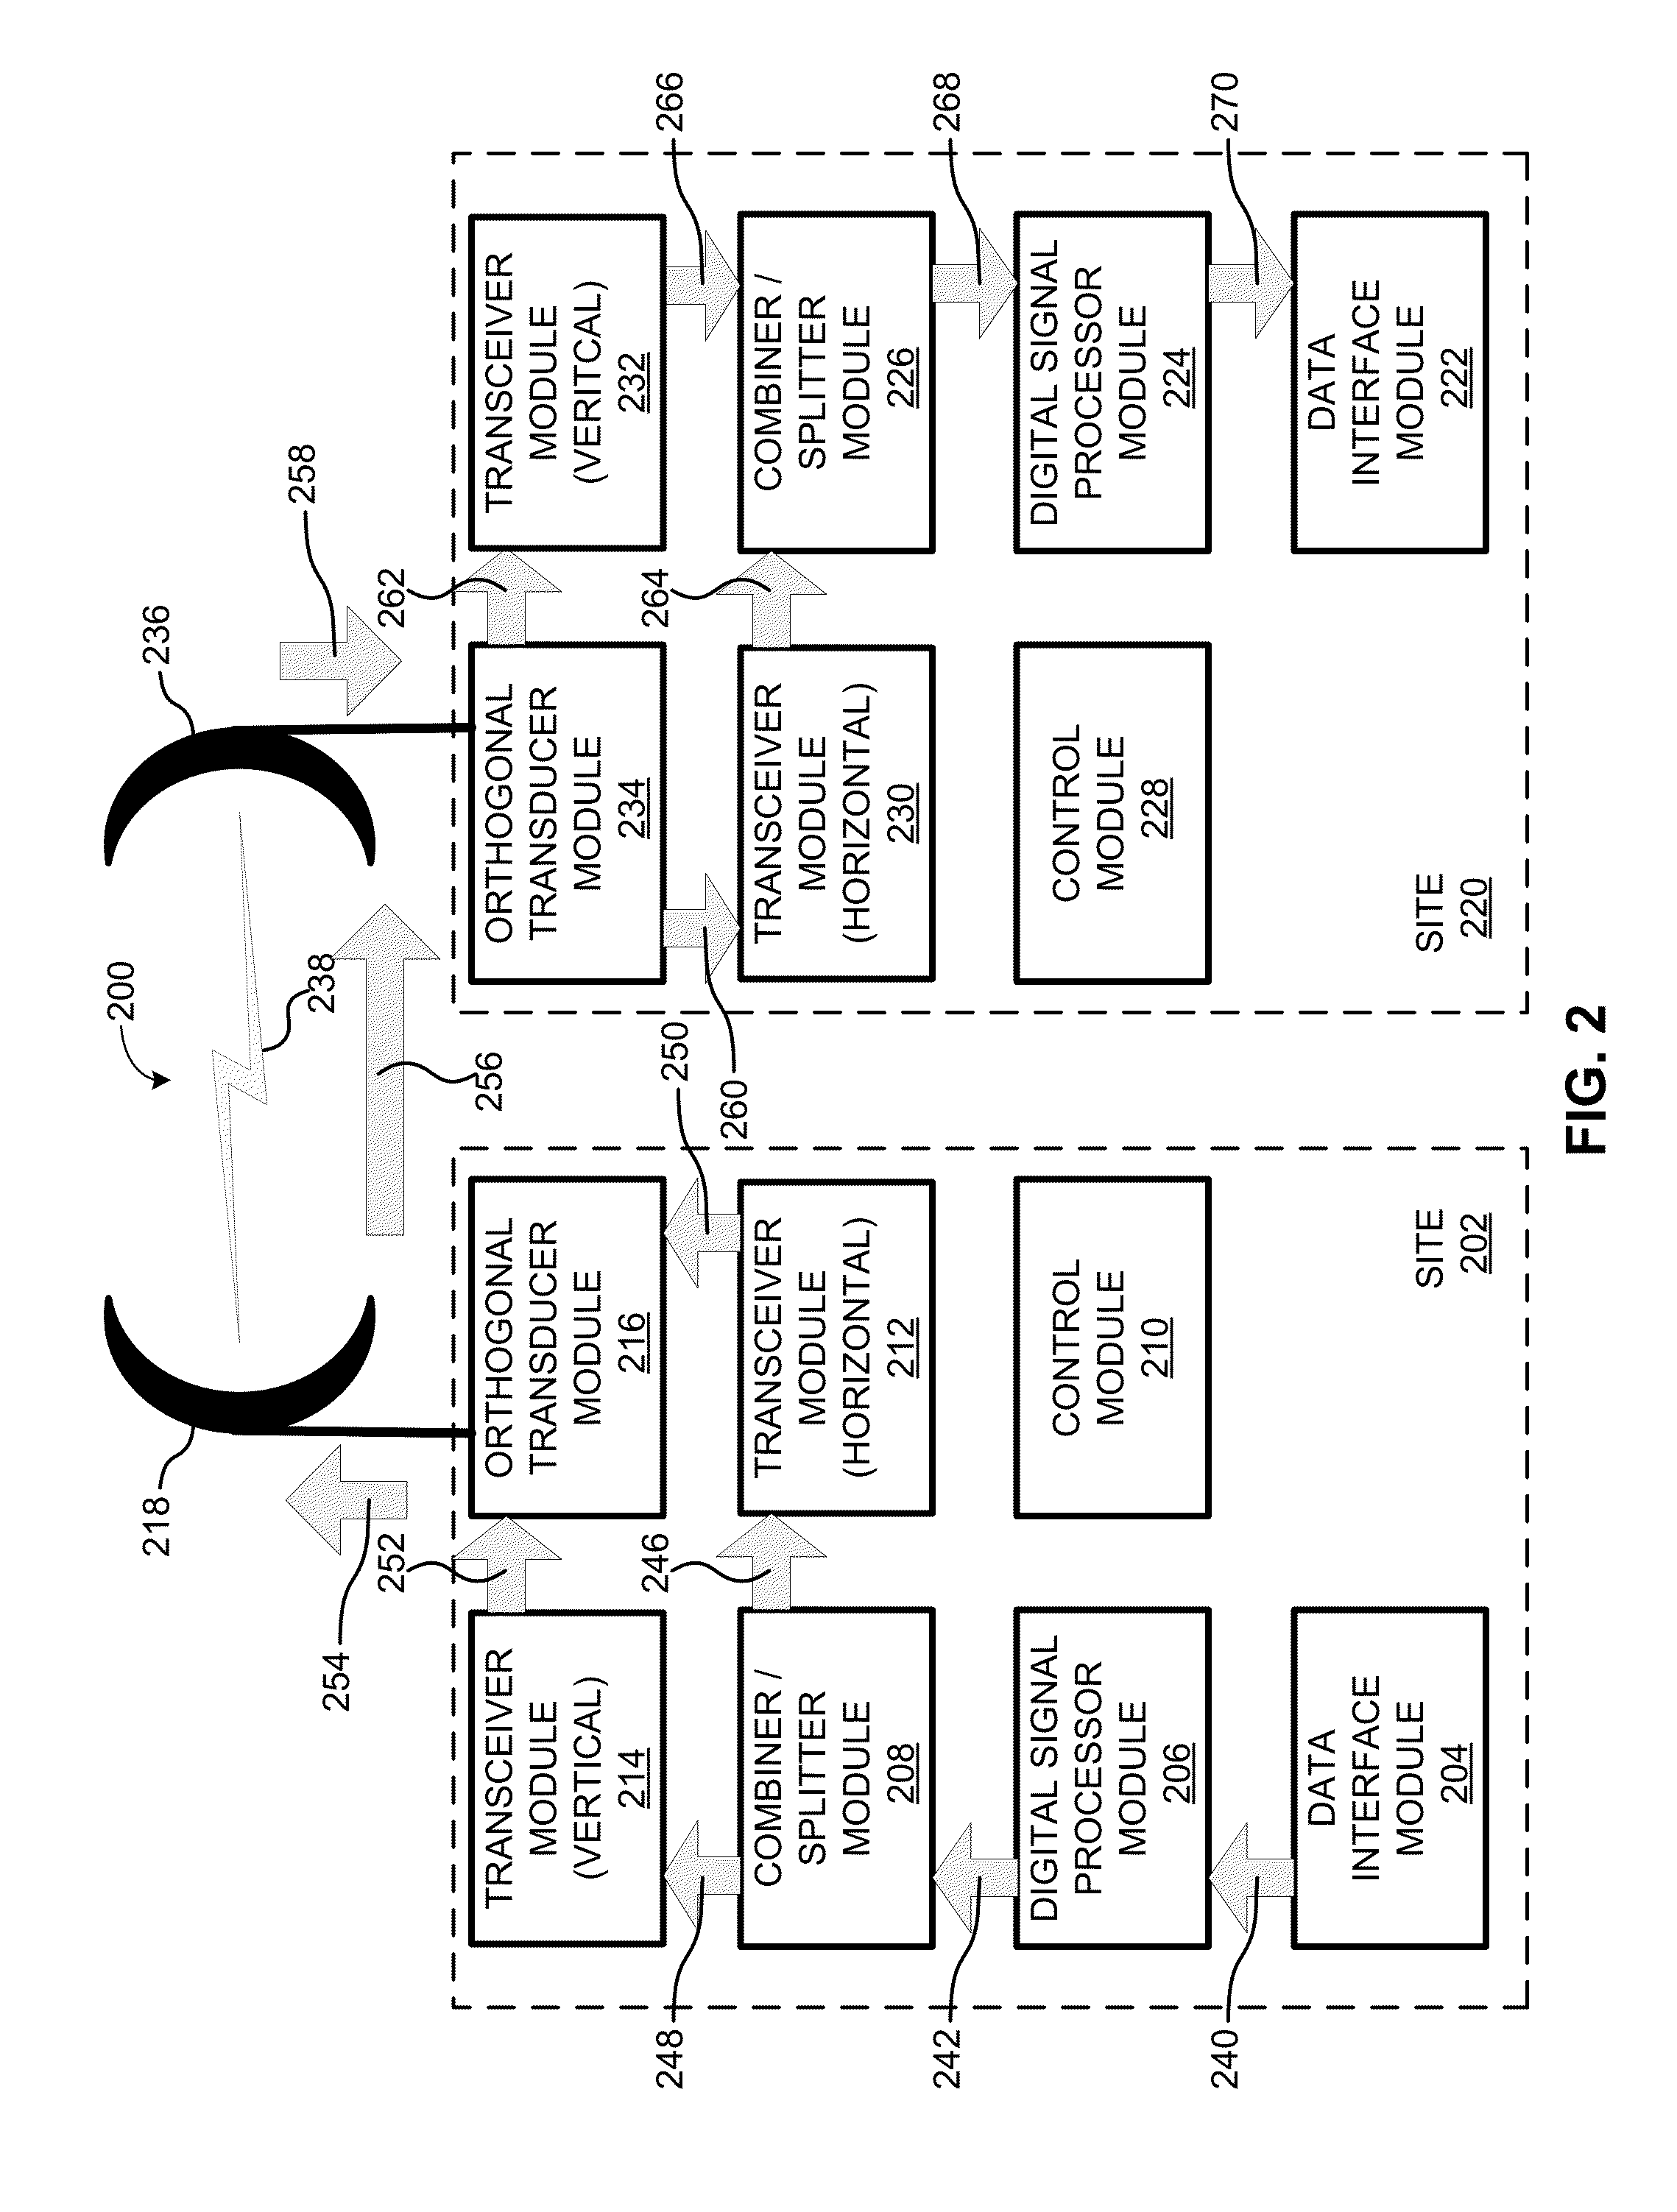 Systems and Methods for Cancelling Cross Polarization Interference in Wireless Communication Using Polarization Diversity